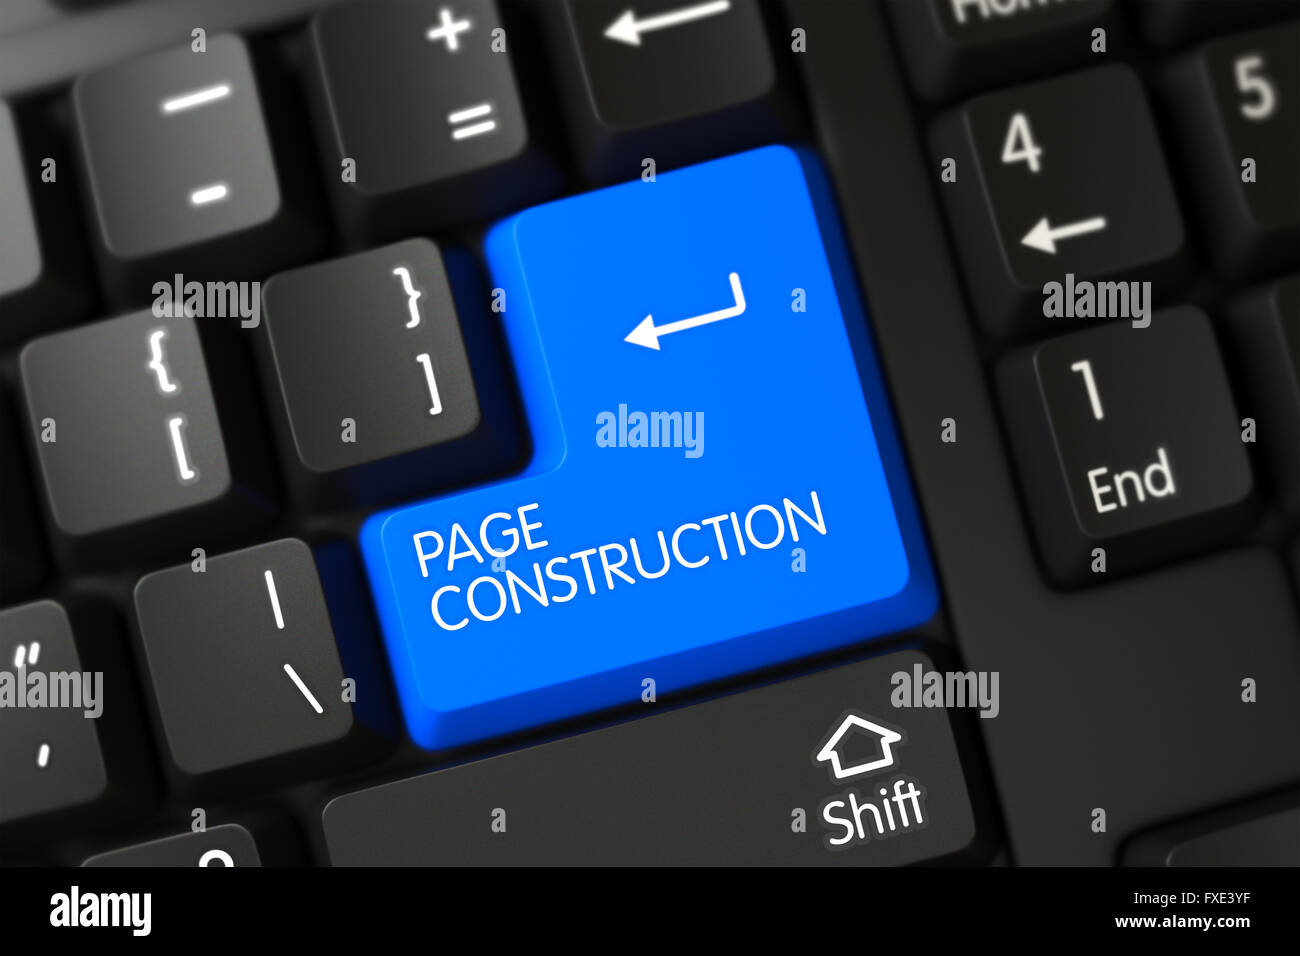 Blue Page Construction Button on Keyboard. Stock Photo